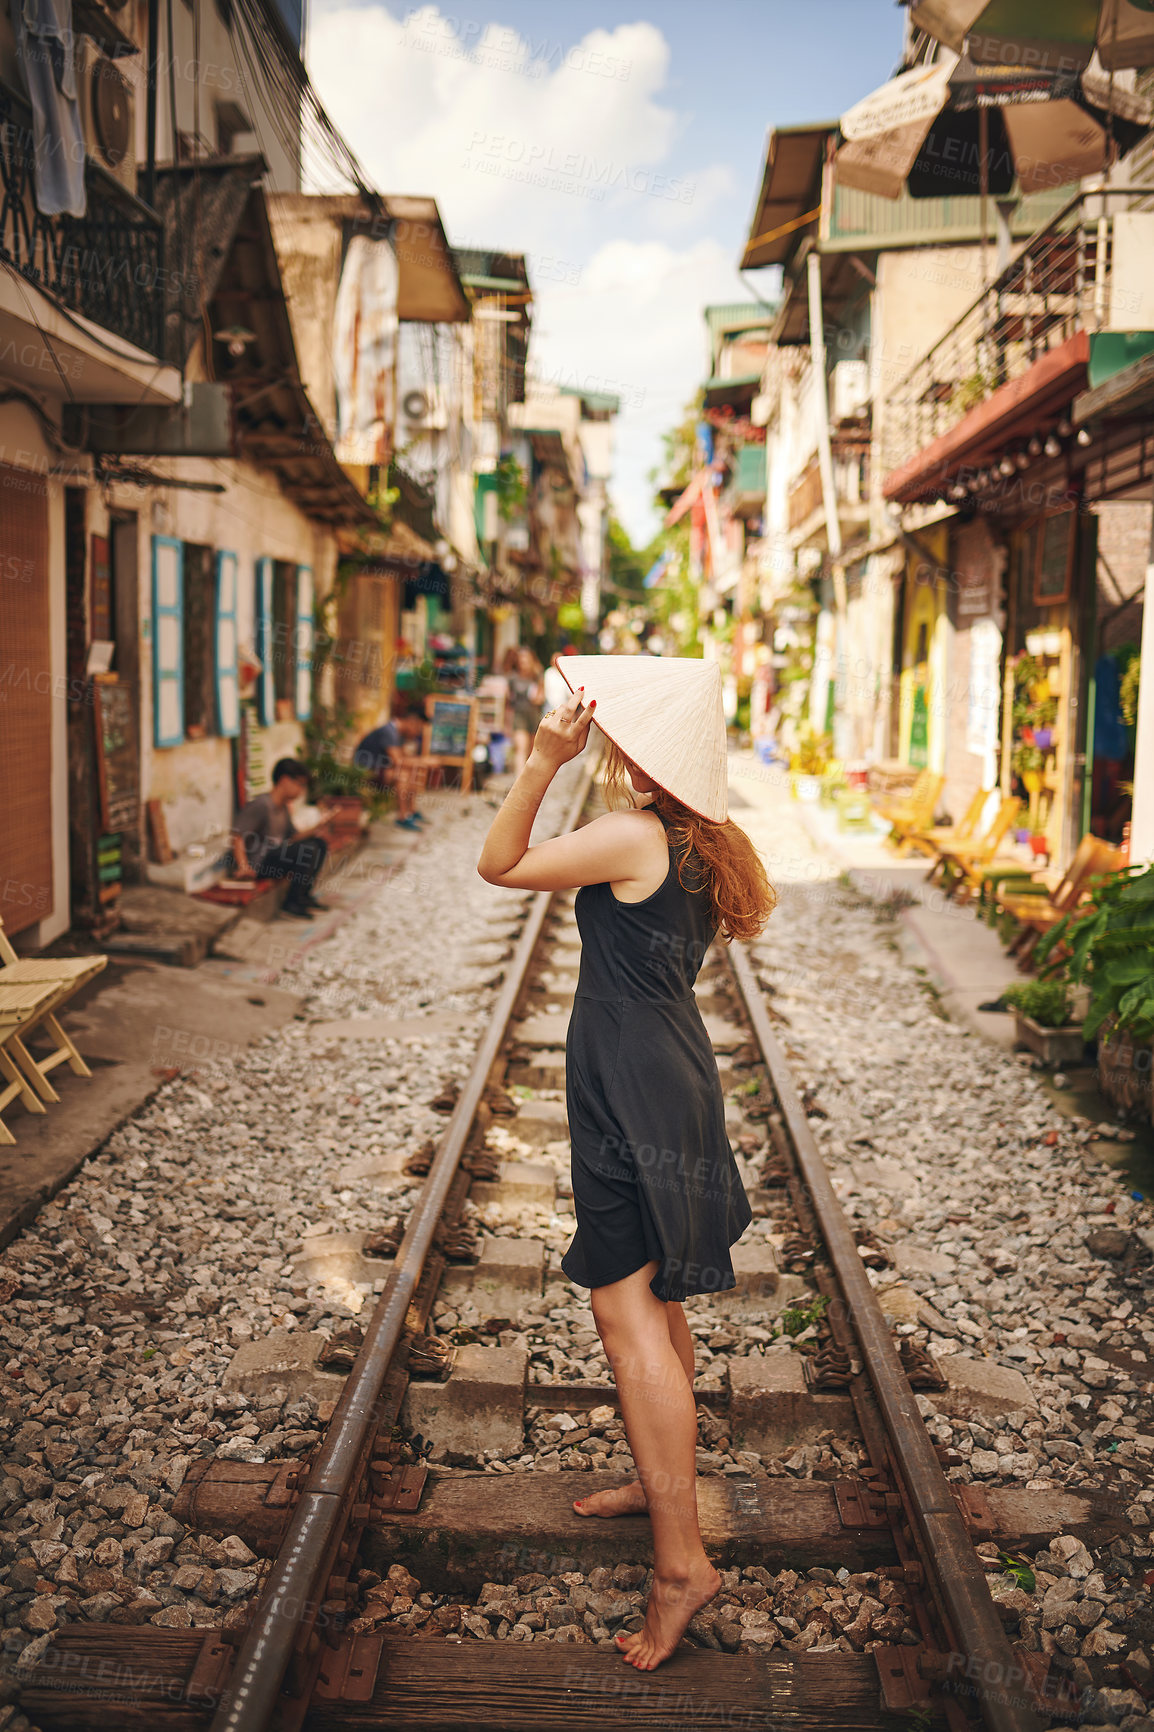 Buy stock photo Shot of a young woman wearing a conical hat while exploring a foreign city